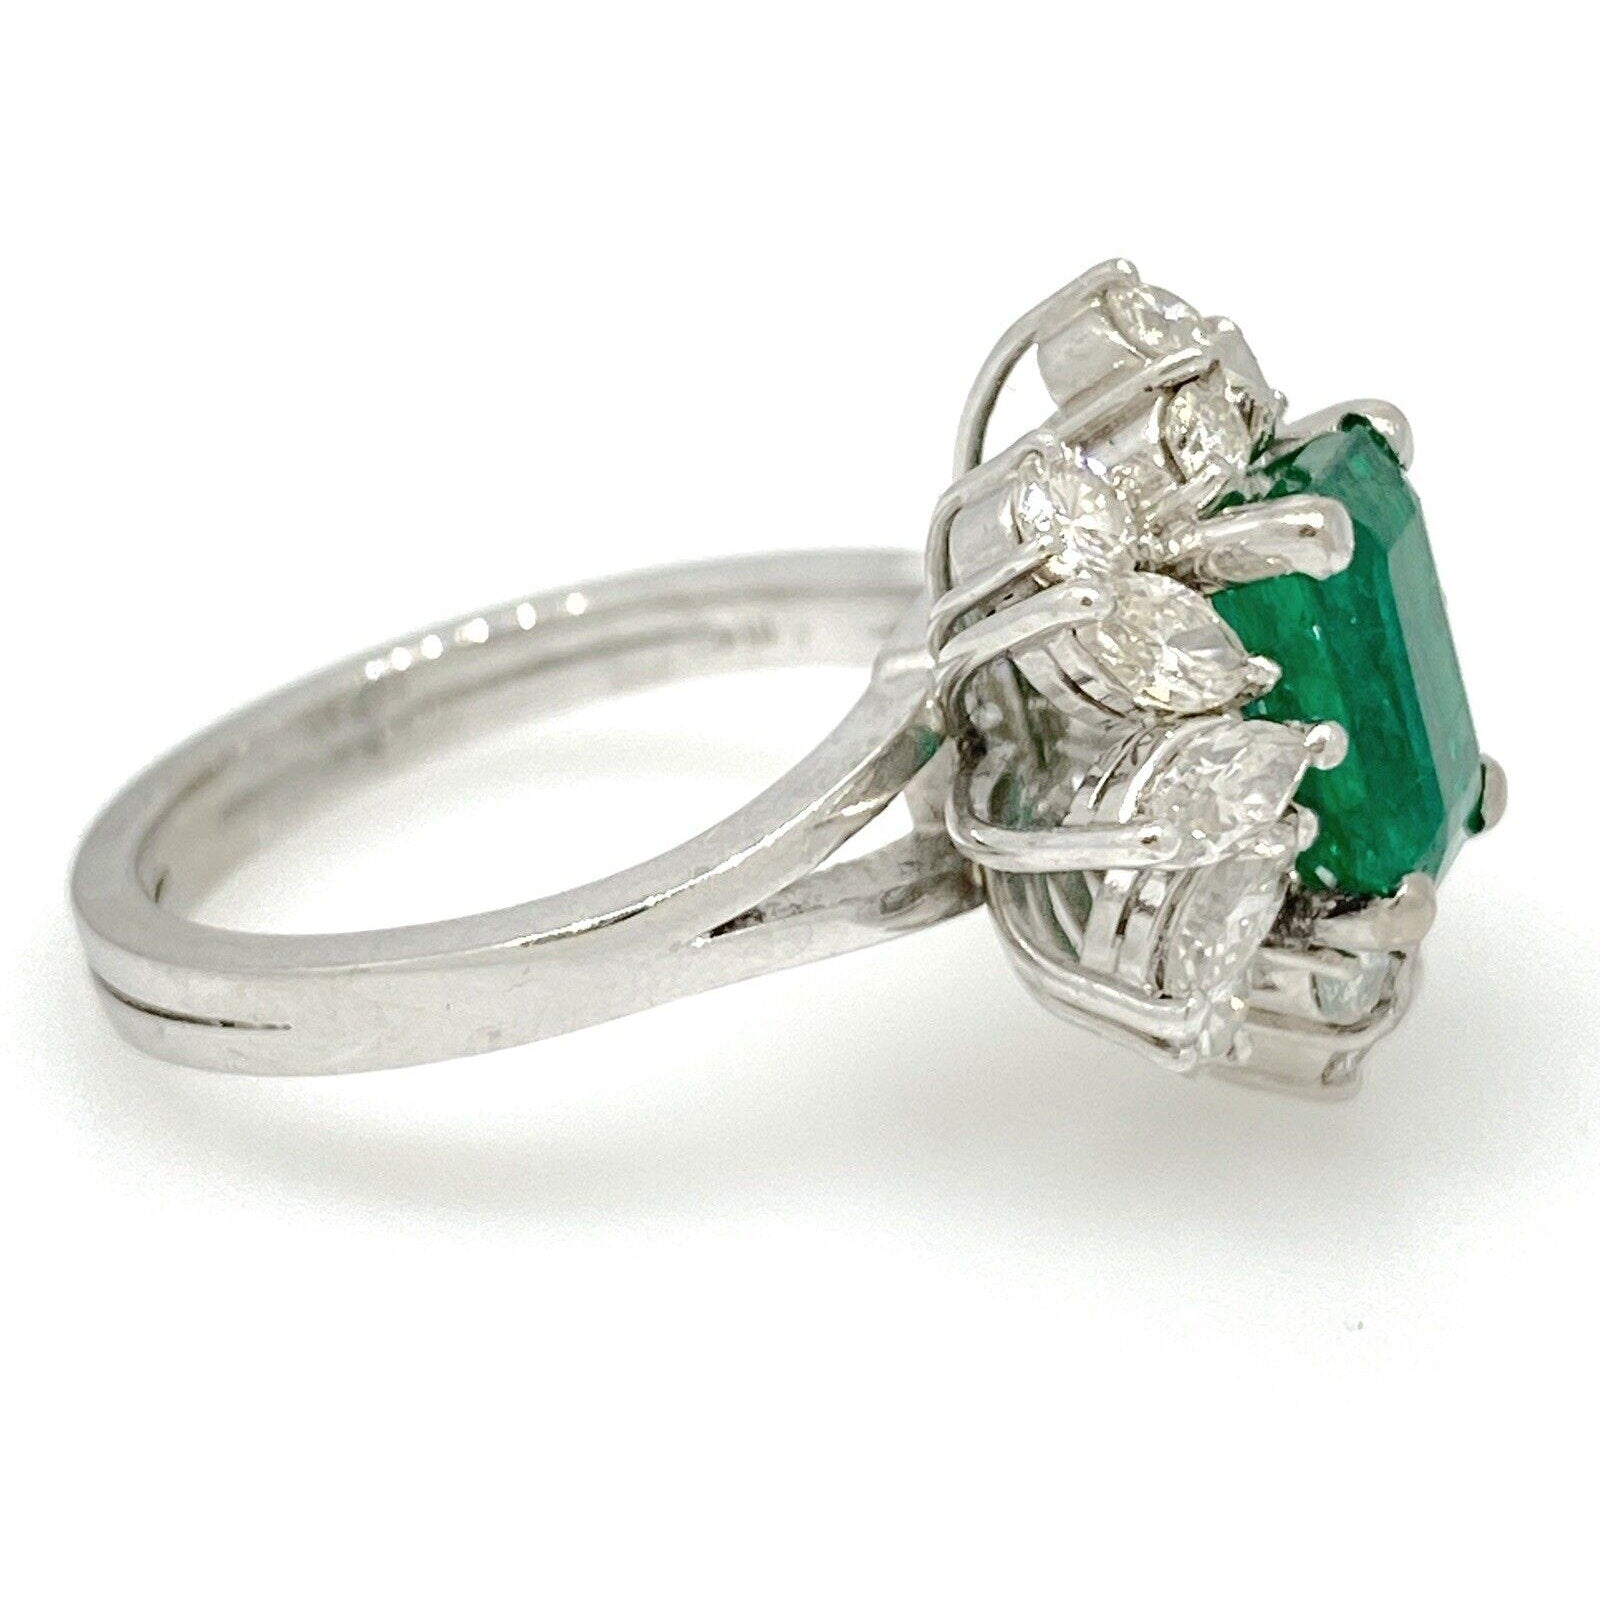 GIA 1.62 cts Colombian Emerald & Diamond Ballerina Ring 18k White Gold -HM2083BE